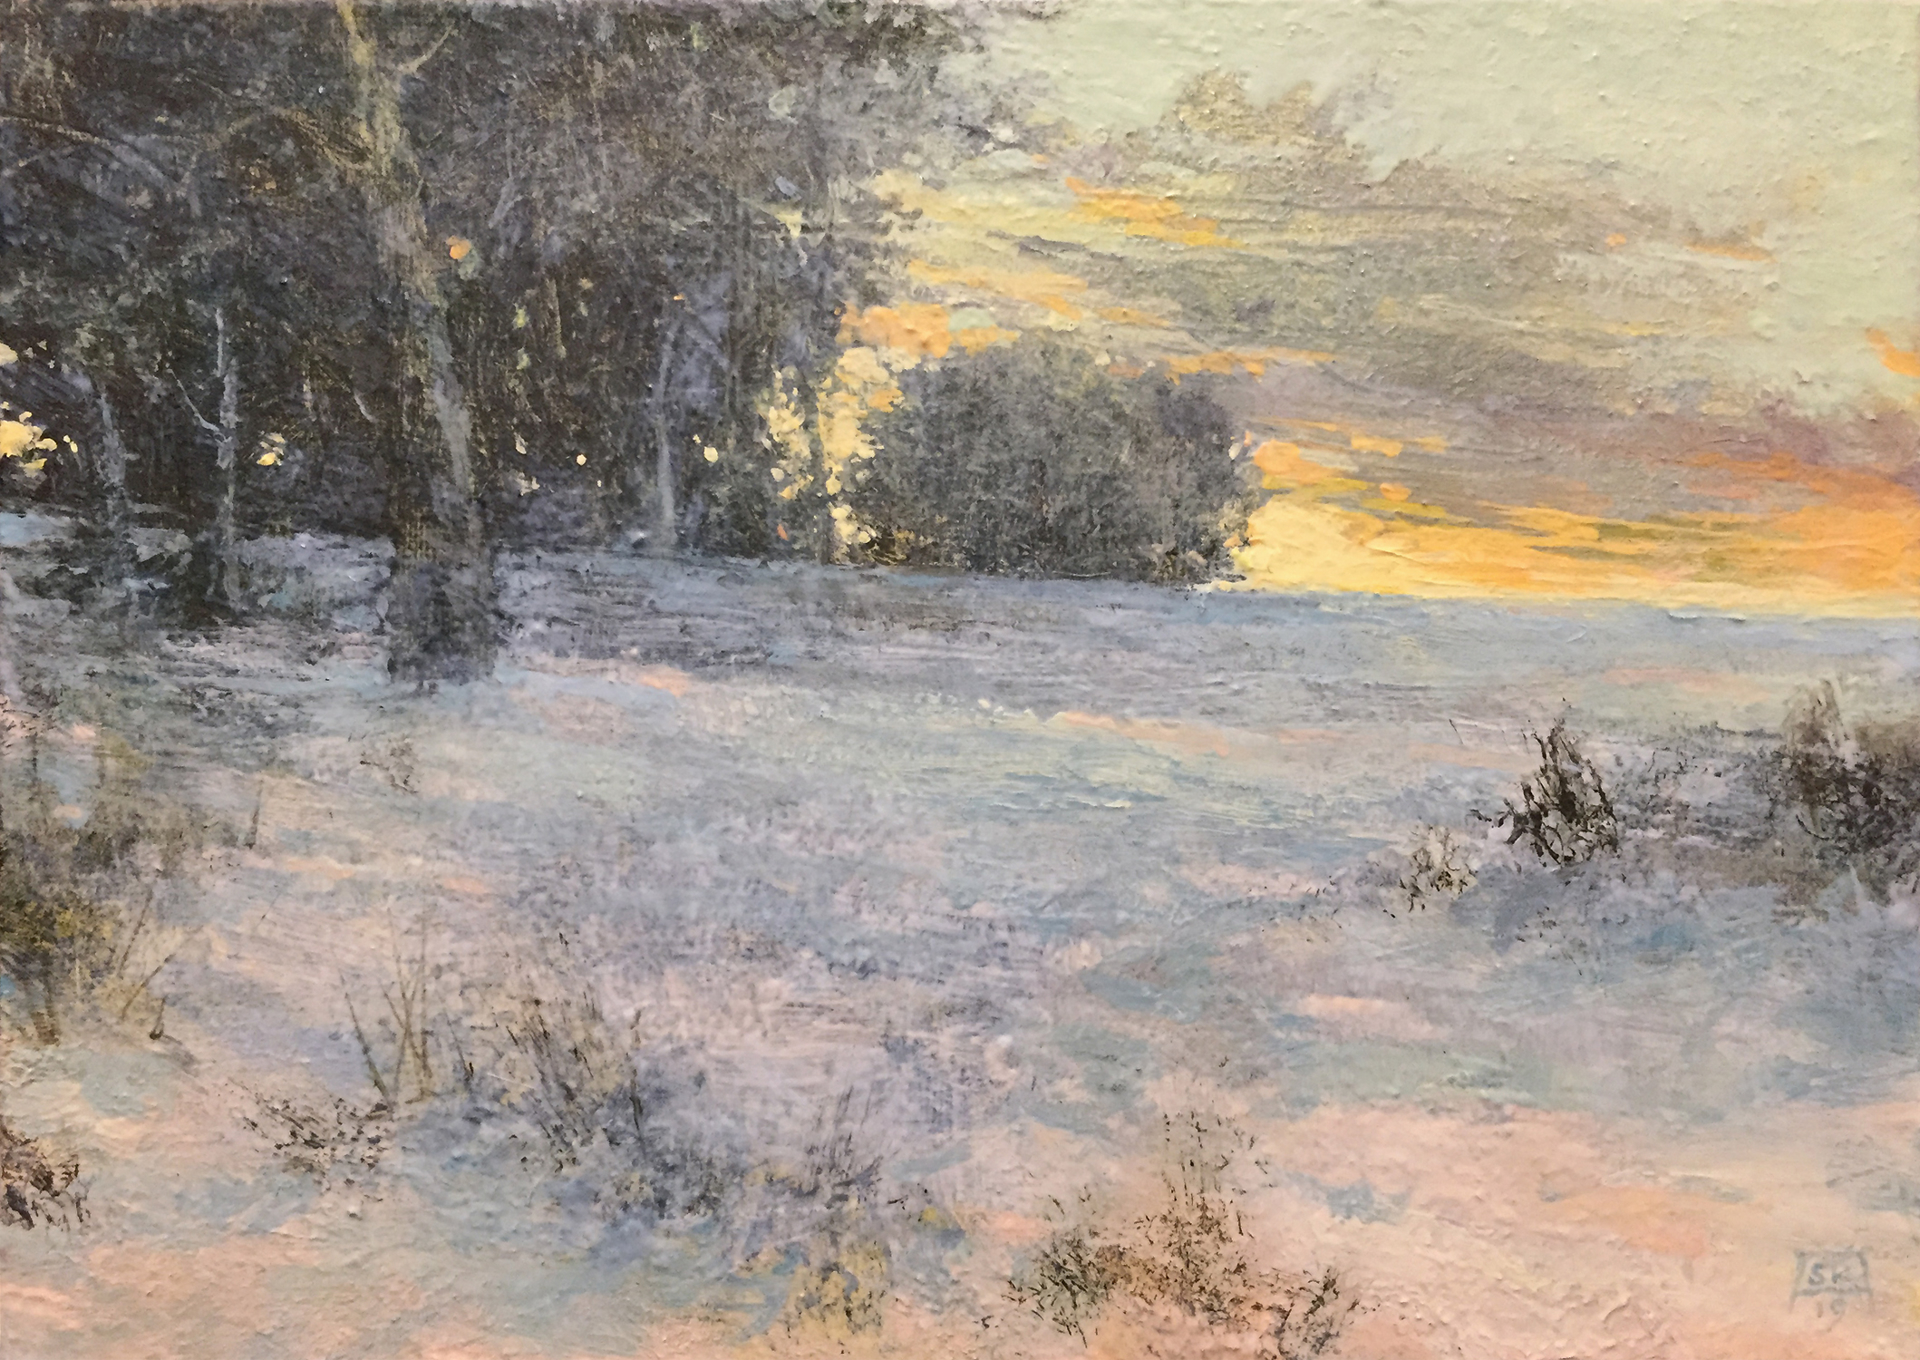 The Clearing (Winter) by Shawn Krueger